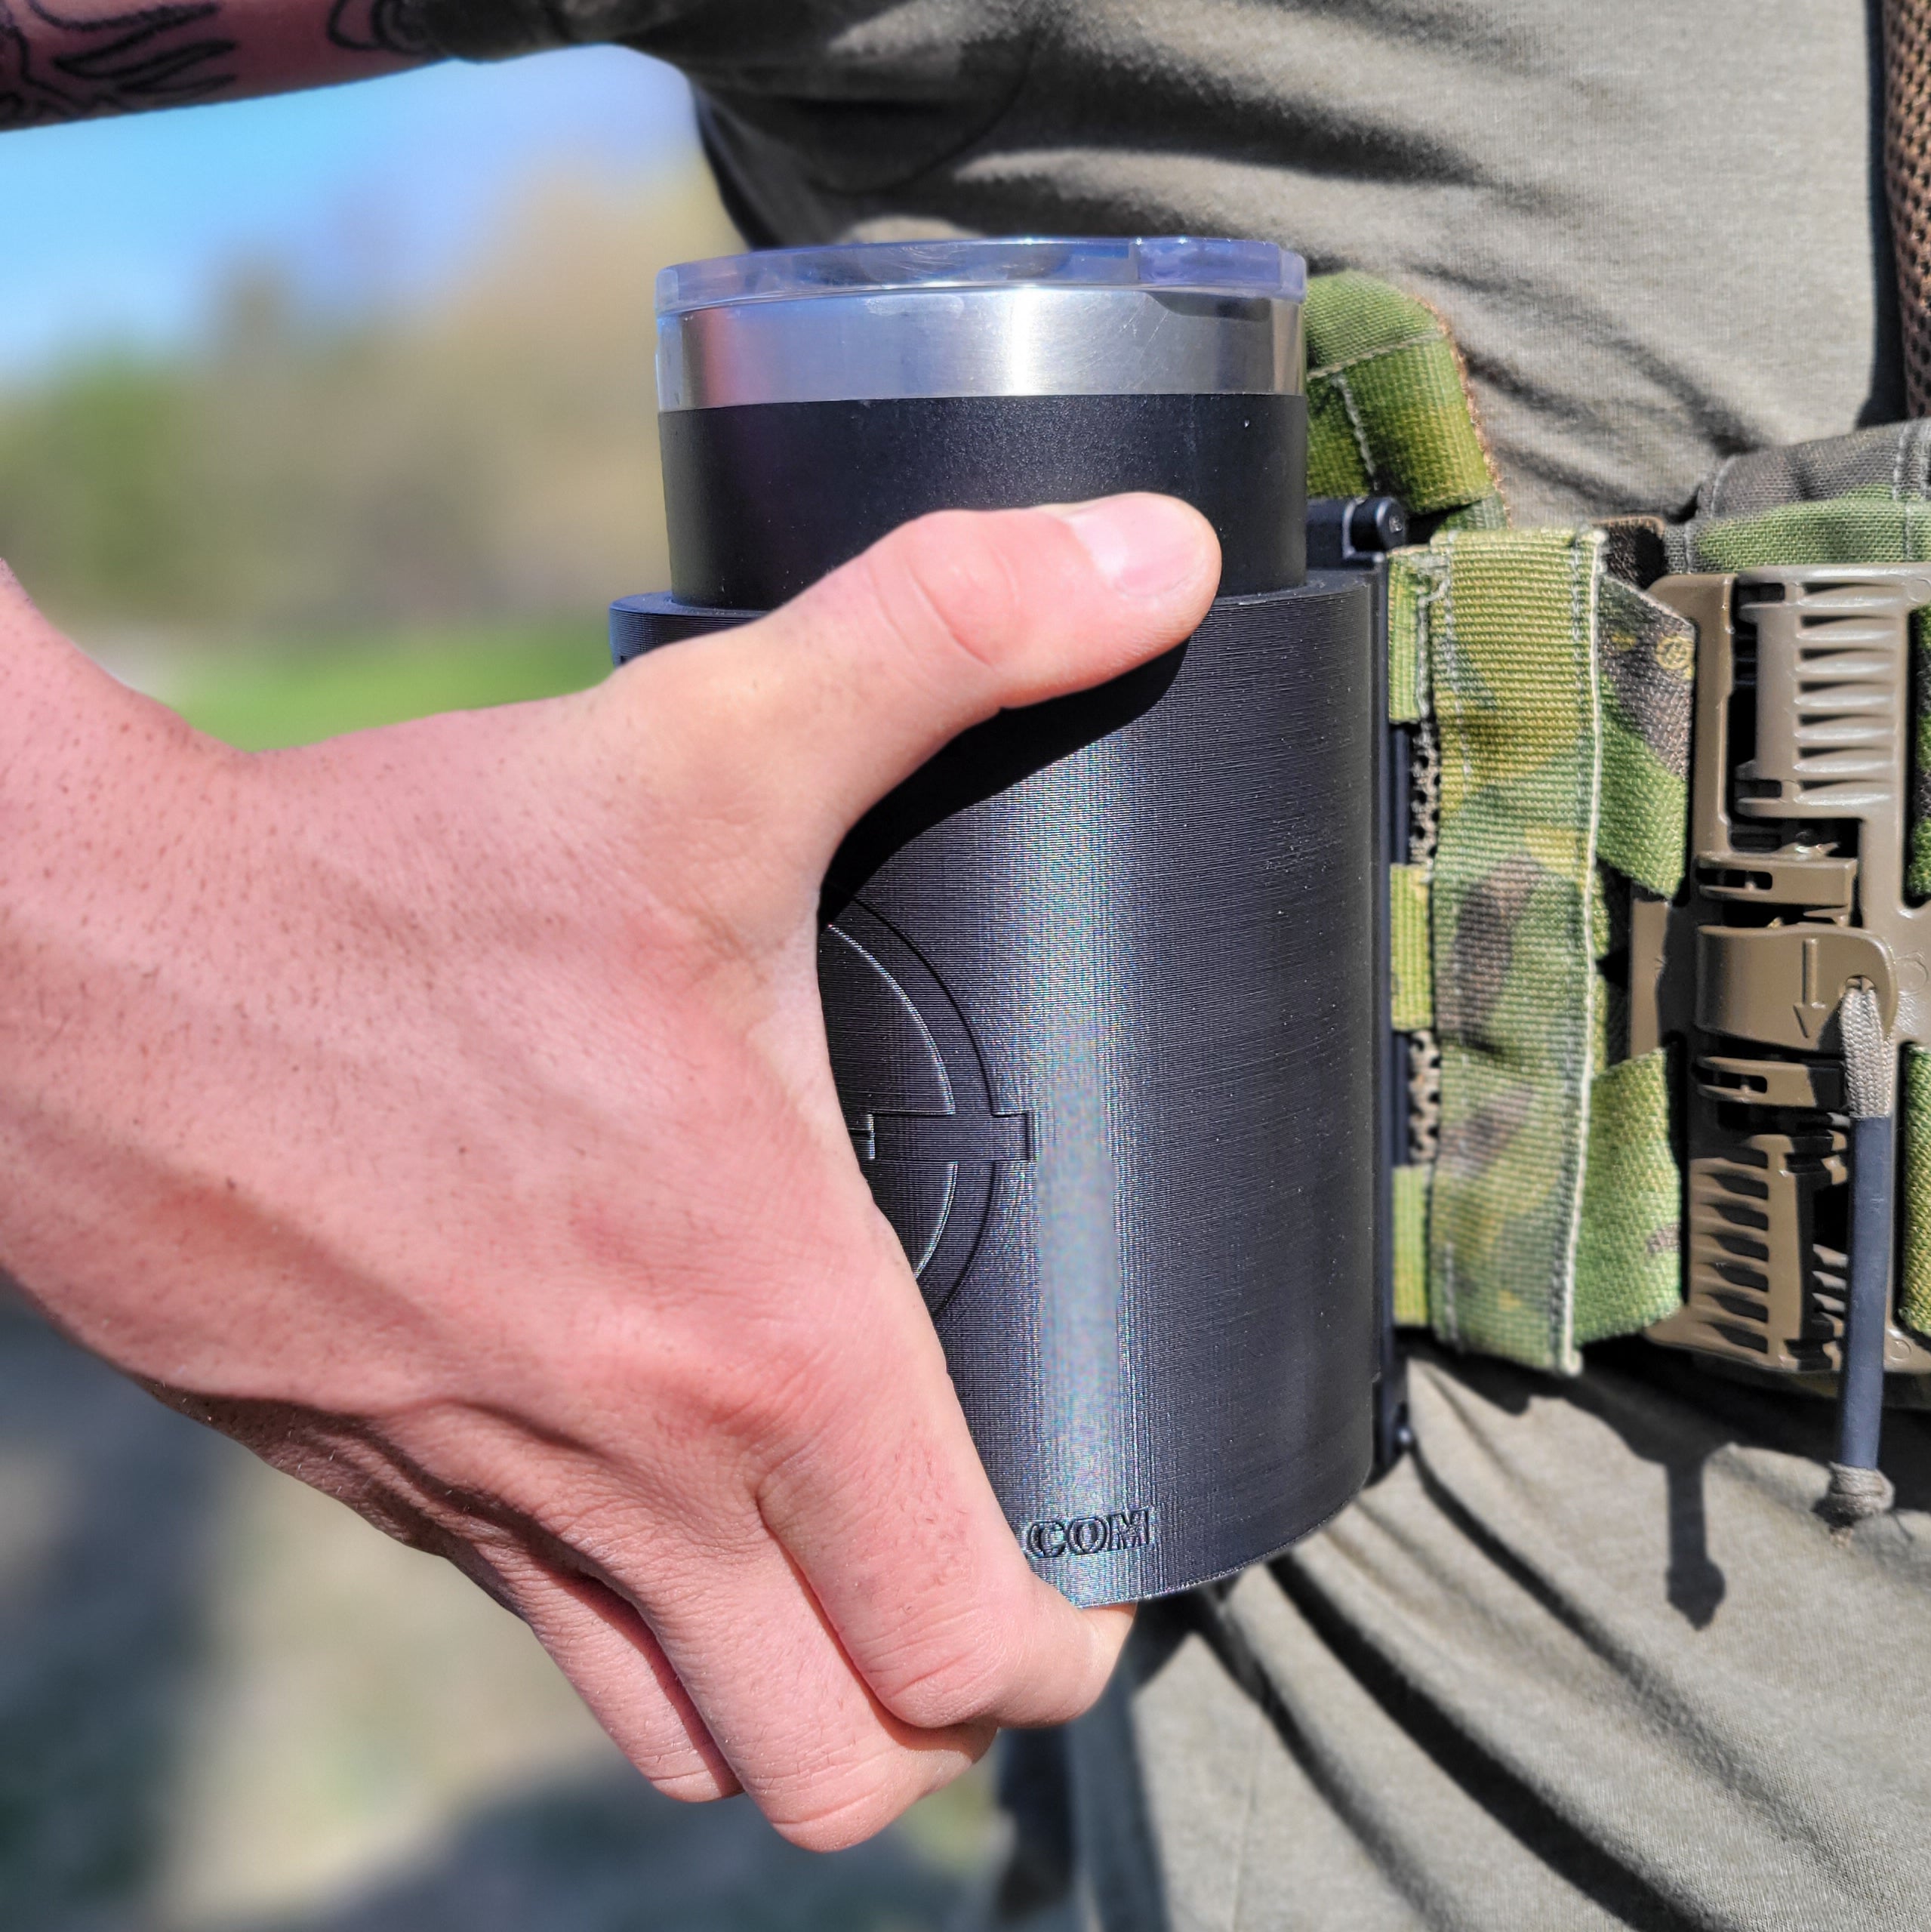 Our 3D-printed 20-ounce Yeti Cup Holder is printed in-house with PETG material. With both Molle and Belt mount options available, this is the best way to take your coffee to the shooting range and keep that caffeine on you. This product is the brainchild of Dave Kipper, the ILEA lead firearms Instructor. Made in USA